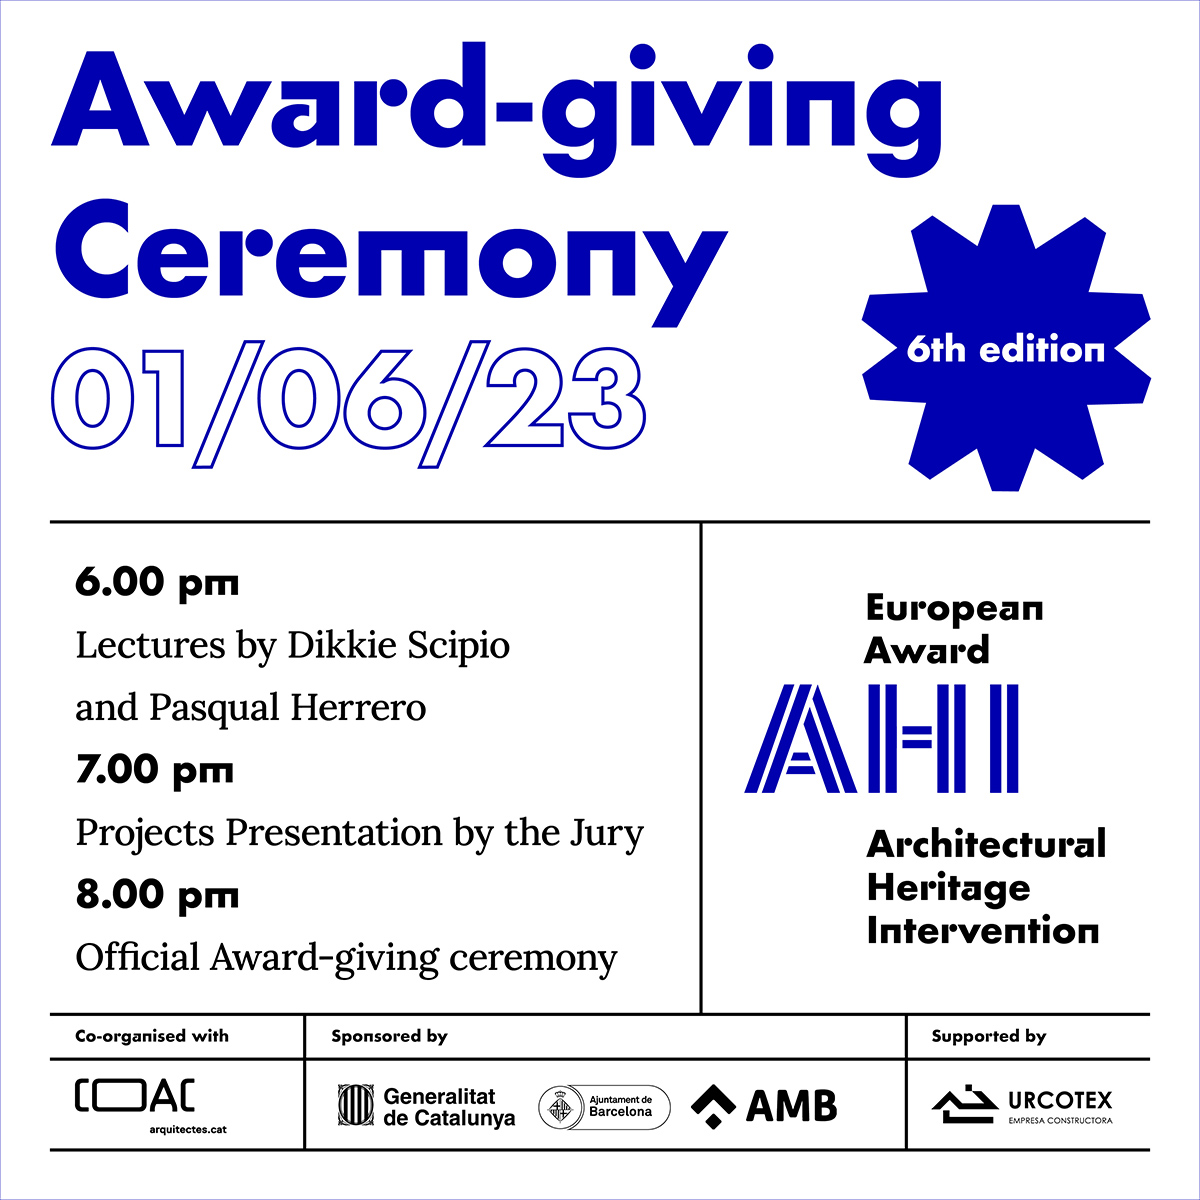 The 6th edition of the AHI European Award culminates with the awards ceremony in each of its different categories